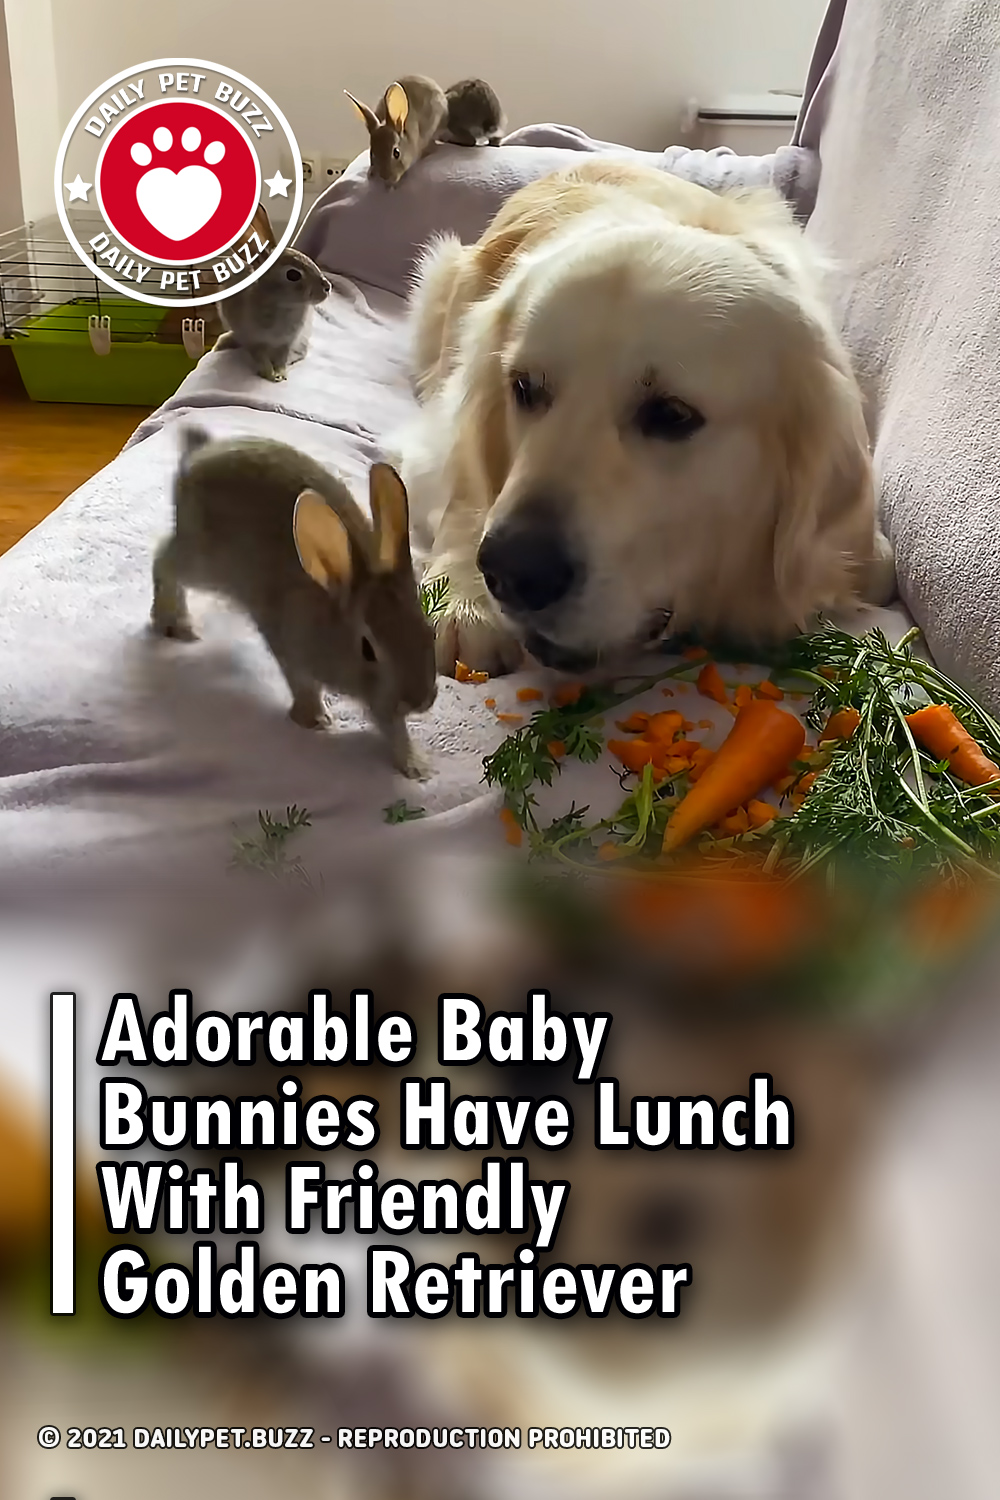 Adorable Baby Bunnies Have Lunch With Friendly Golden Retriever